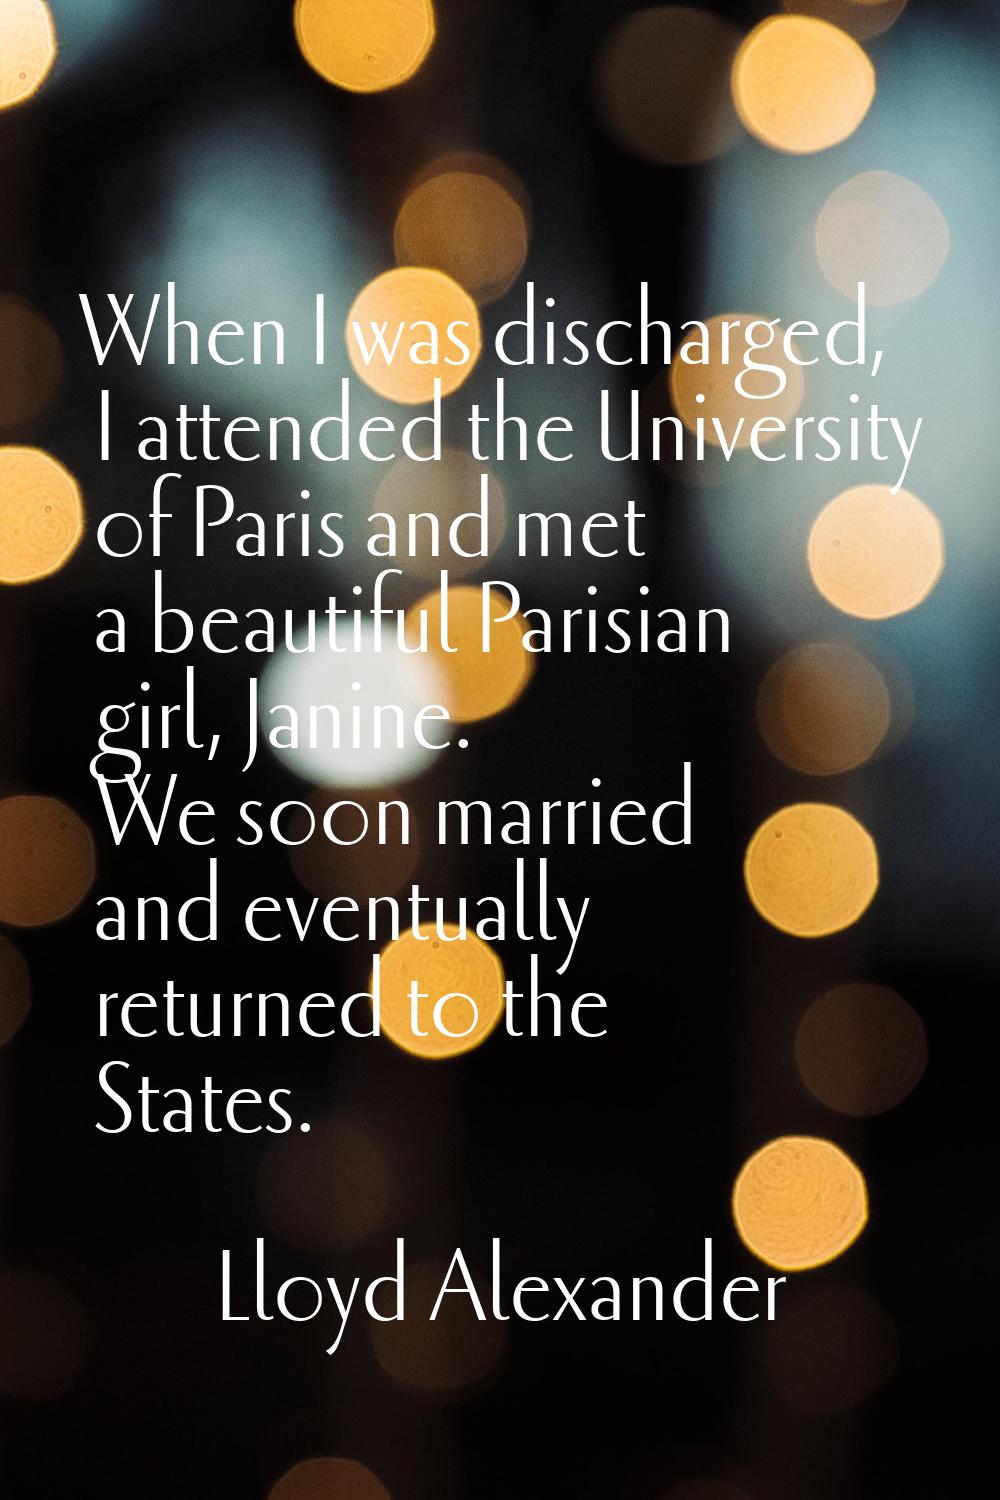 When I was discharged, I attended the University of Paris and met a beautiful Parisian girl, Janine